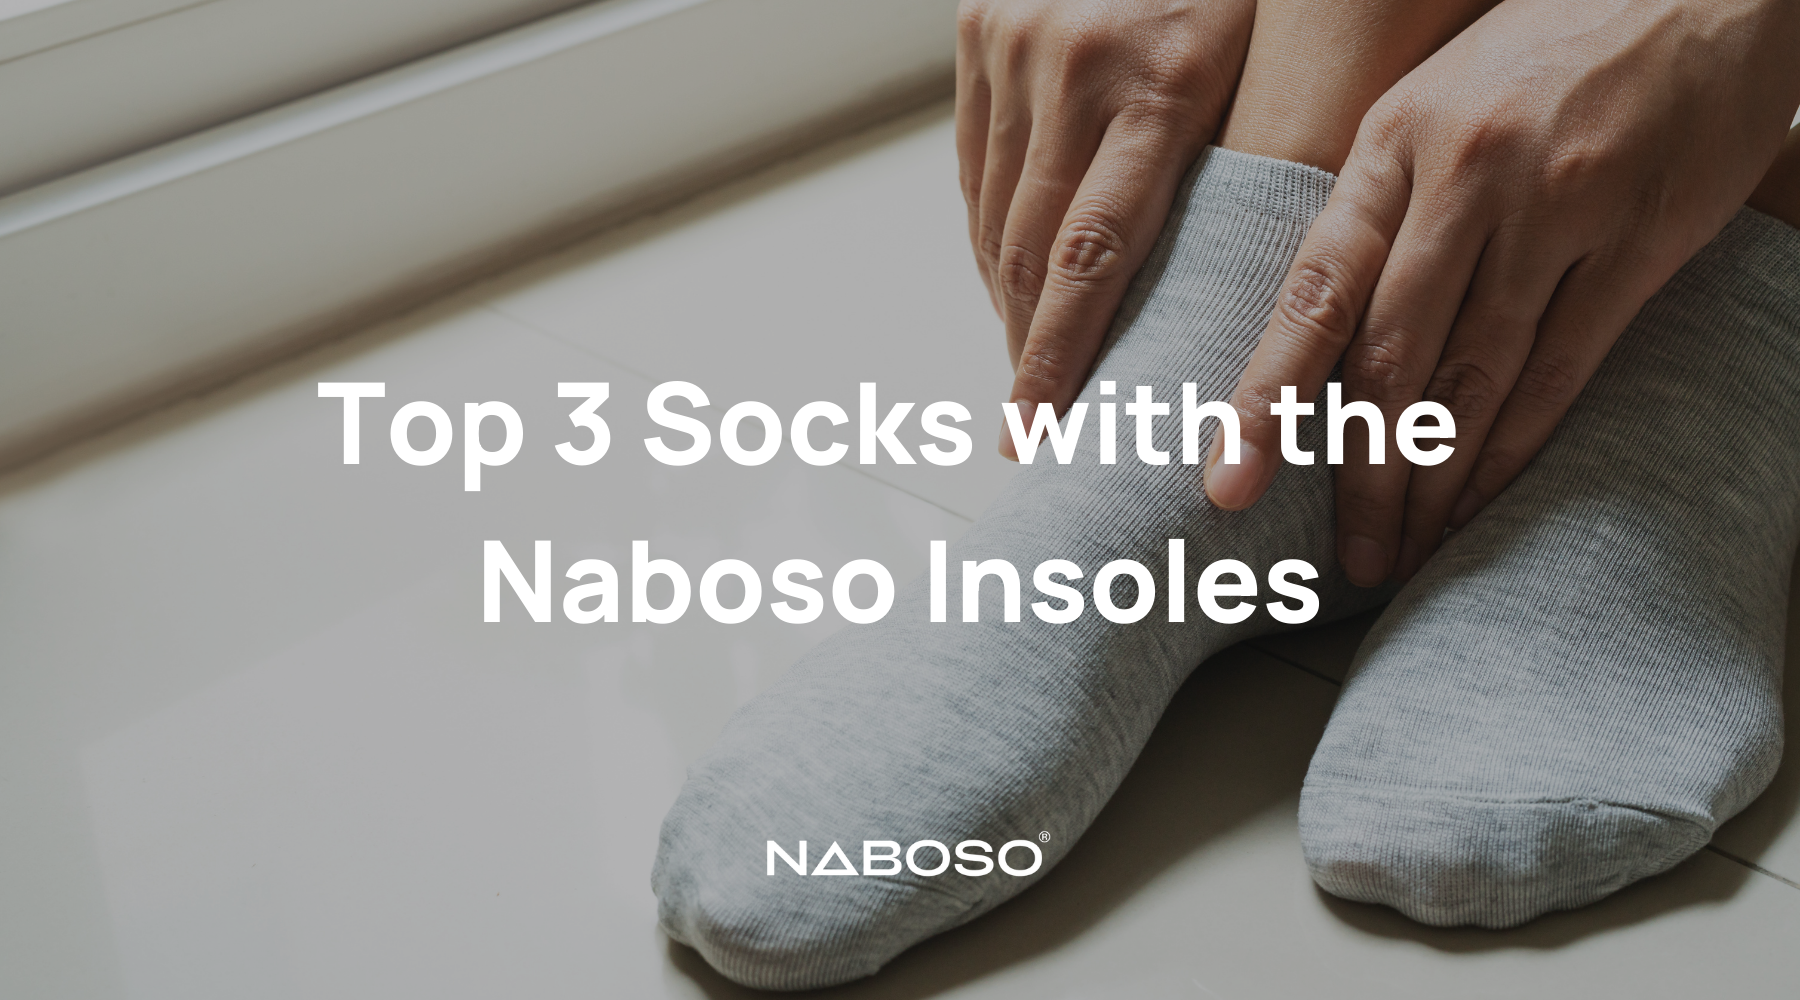 Top 3 Socks with the Naboso Insoles.